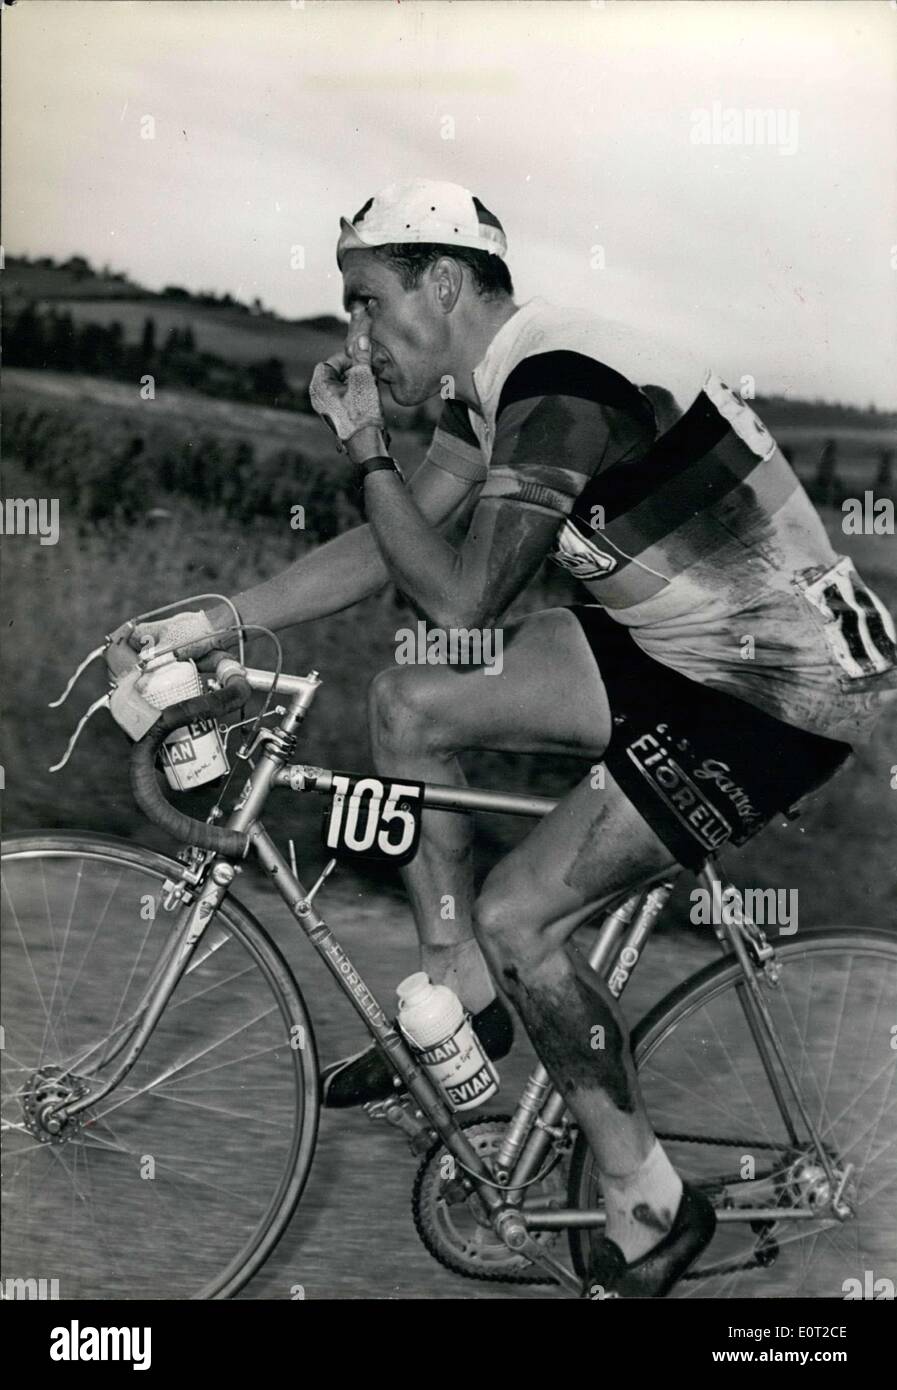 Jul. 08, 1960 - Frechman Graczyk arrives first in Toulouse. Italian Nencini still has the yellow jersey. Pictured: German Junkermann during a round of the Tour de France. Stock Photo